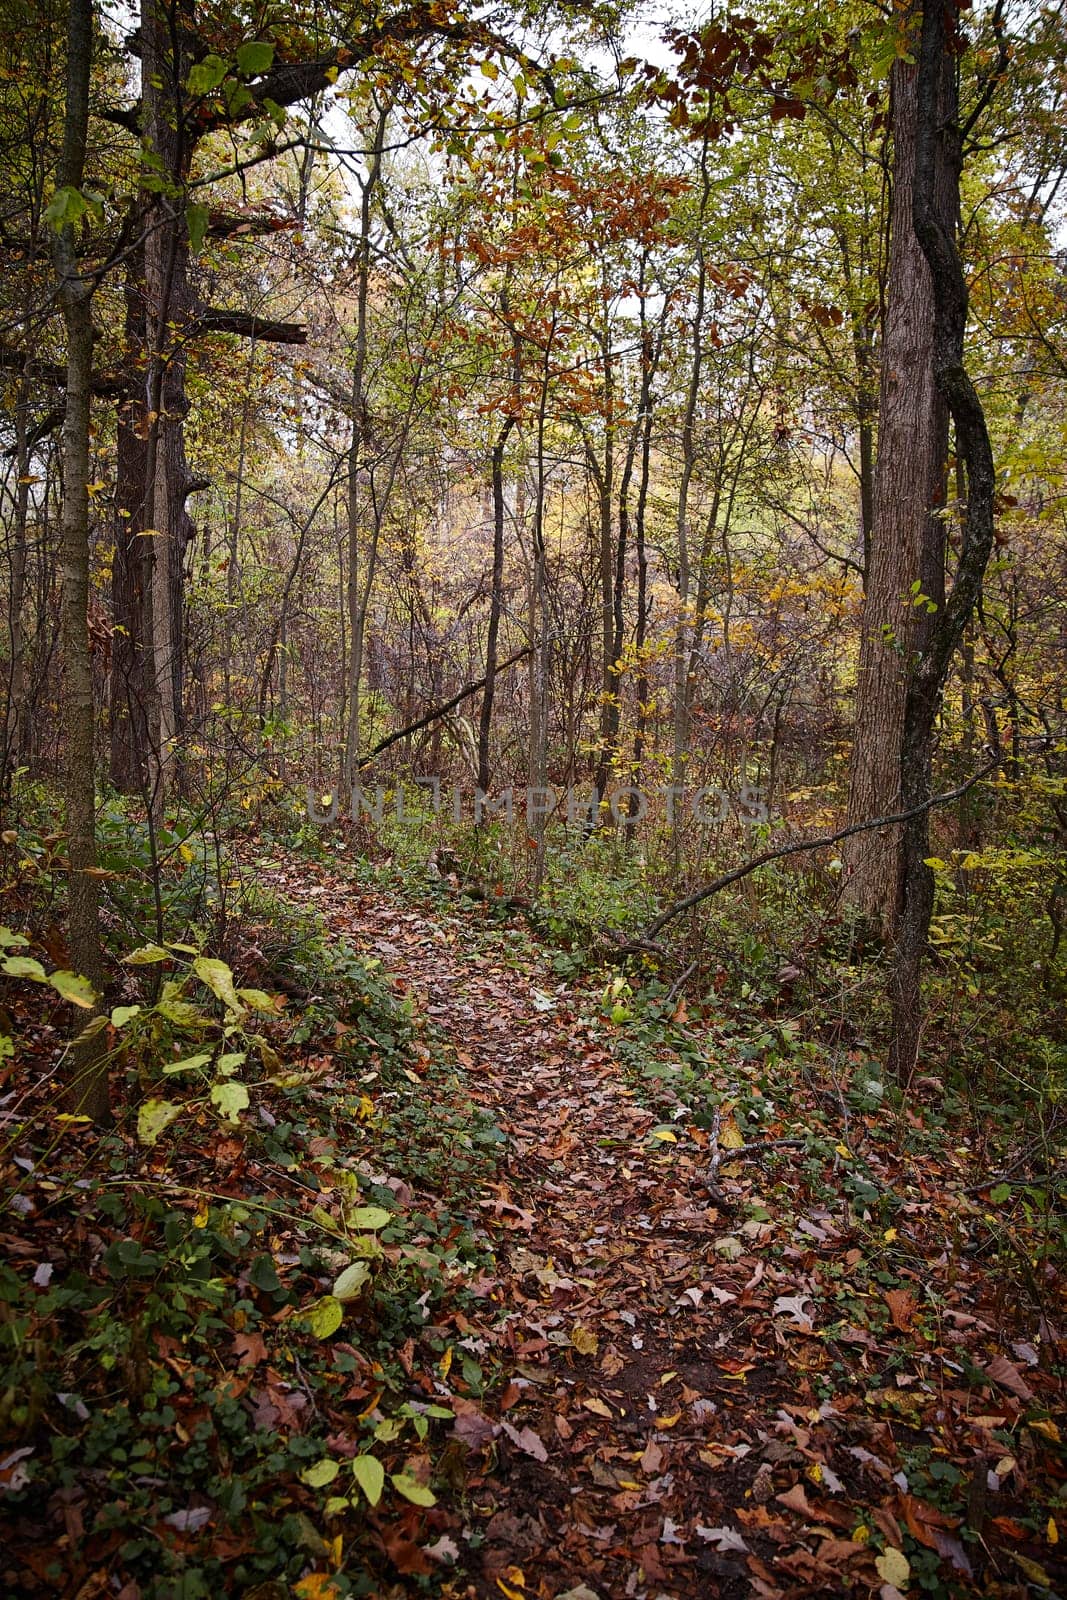 Autumnal Tranquility on Leaf-Strewn Path in Indiana Woodland by njproductions